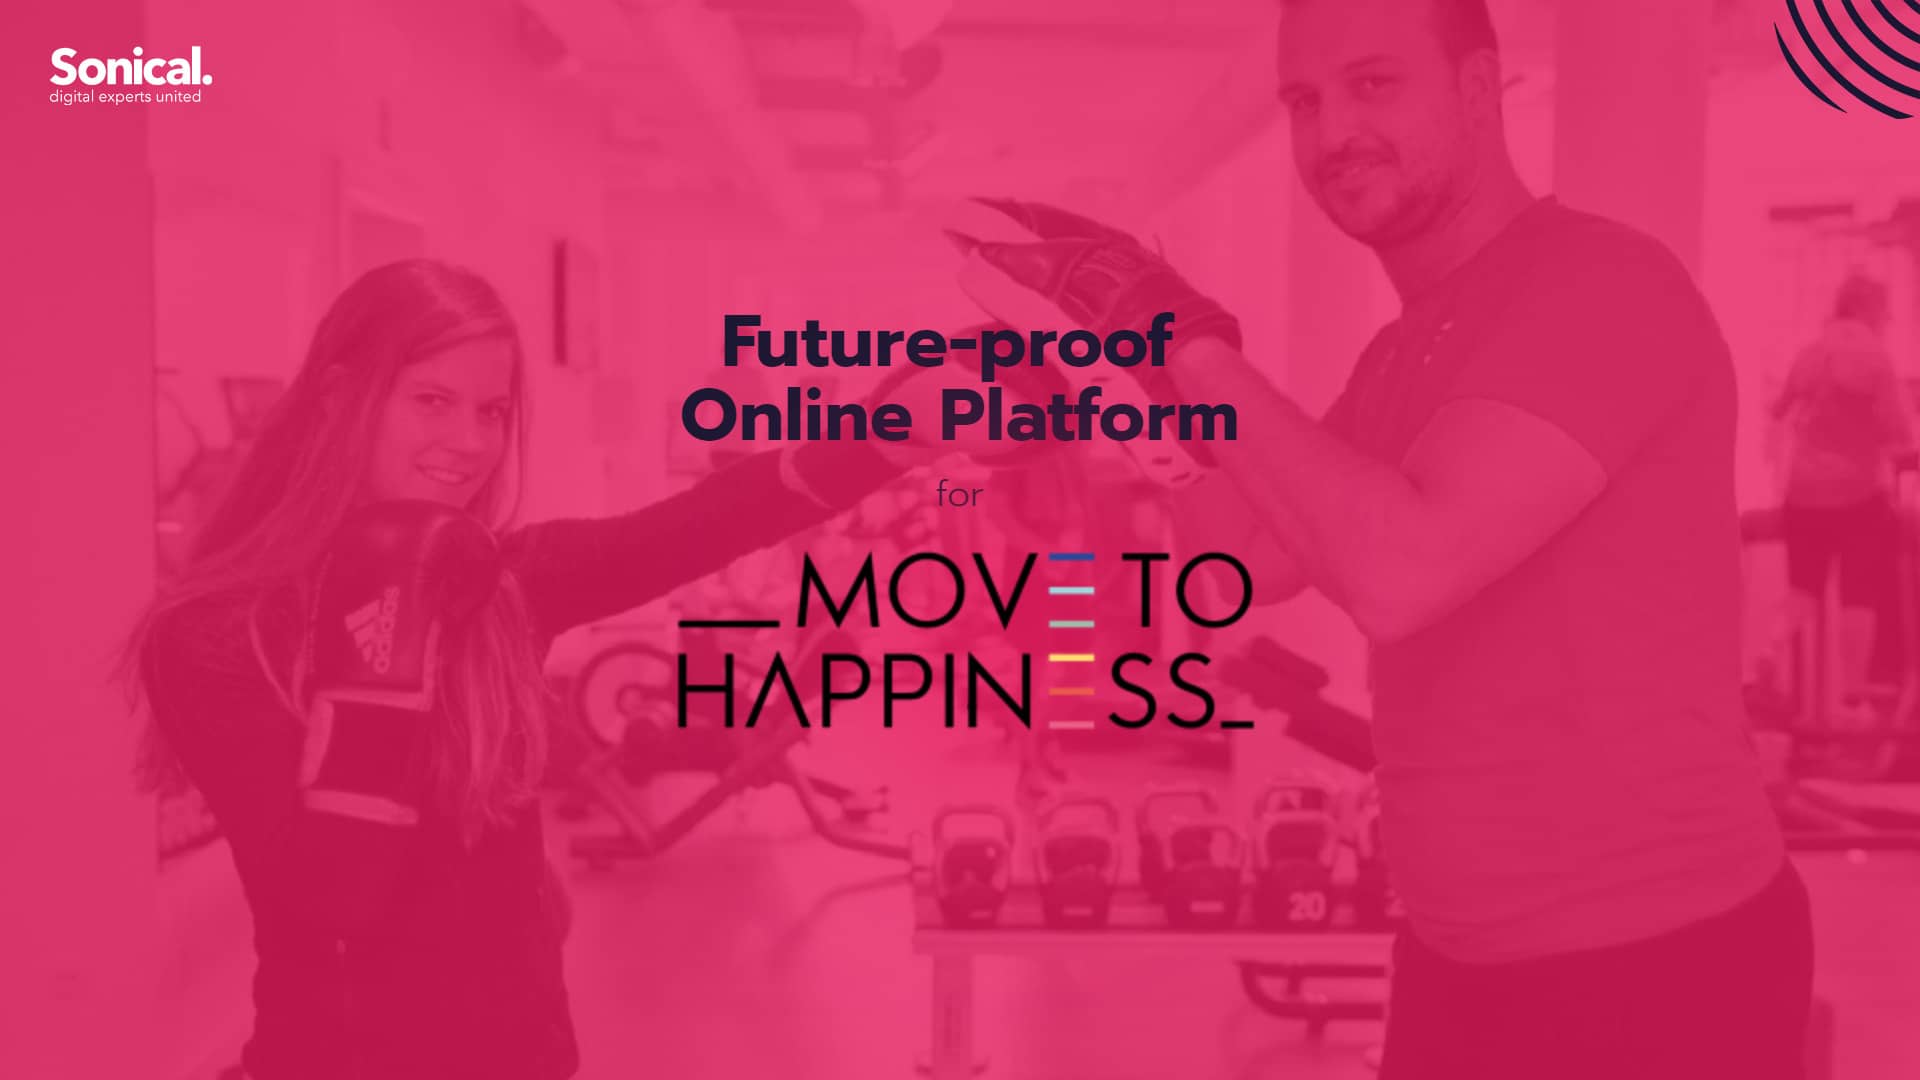 Sonical helps Move To Happiness witth a future-proof online platform